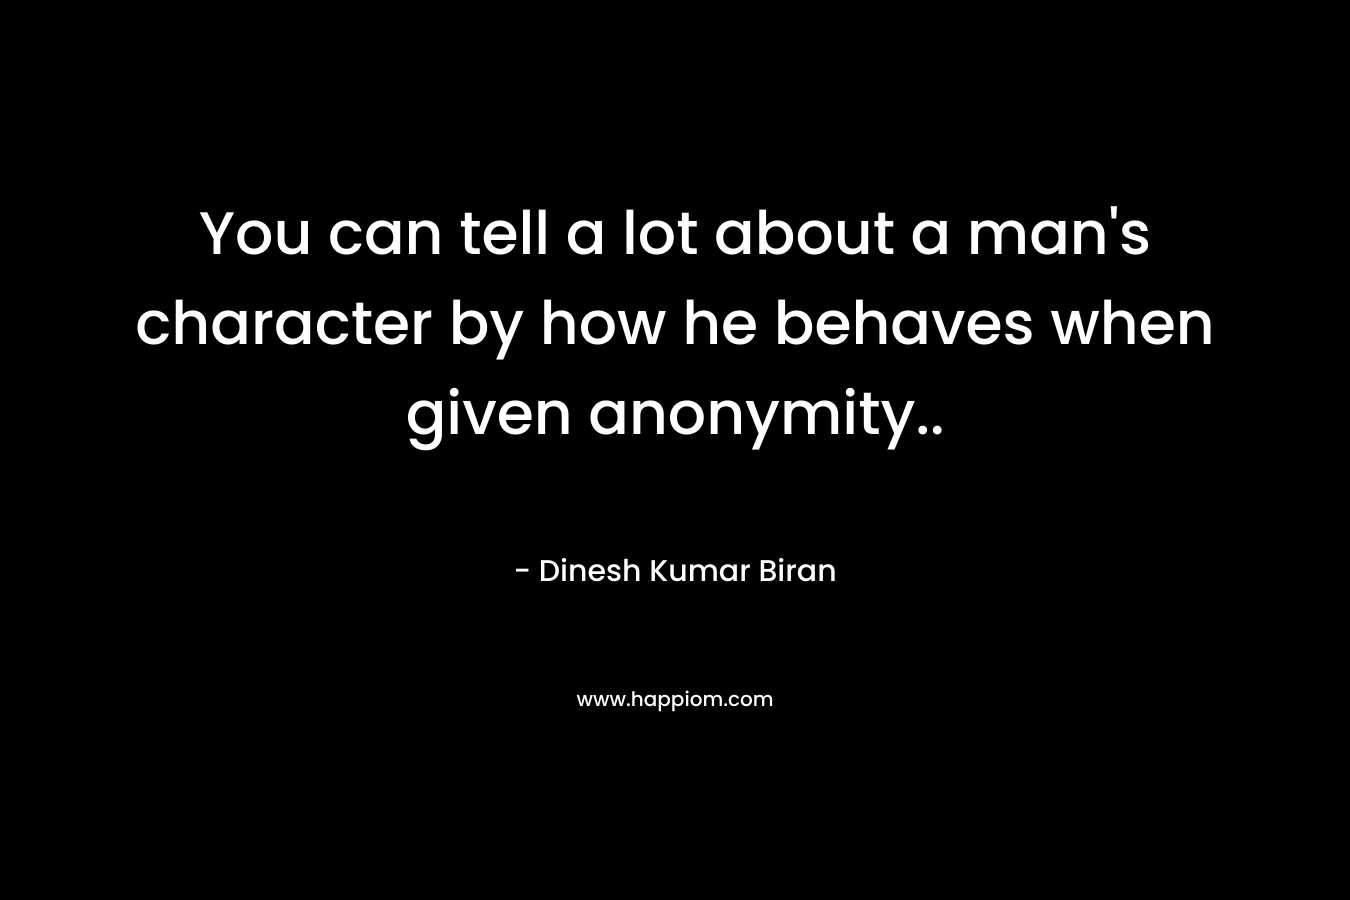 You can tell a lot about a man's character by how he behaves when given anonymity..